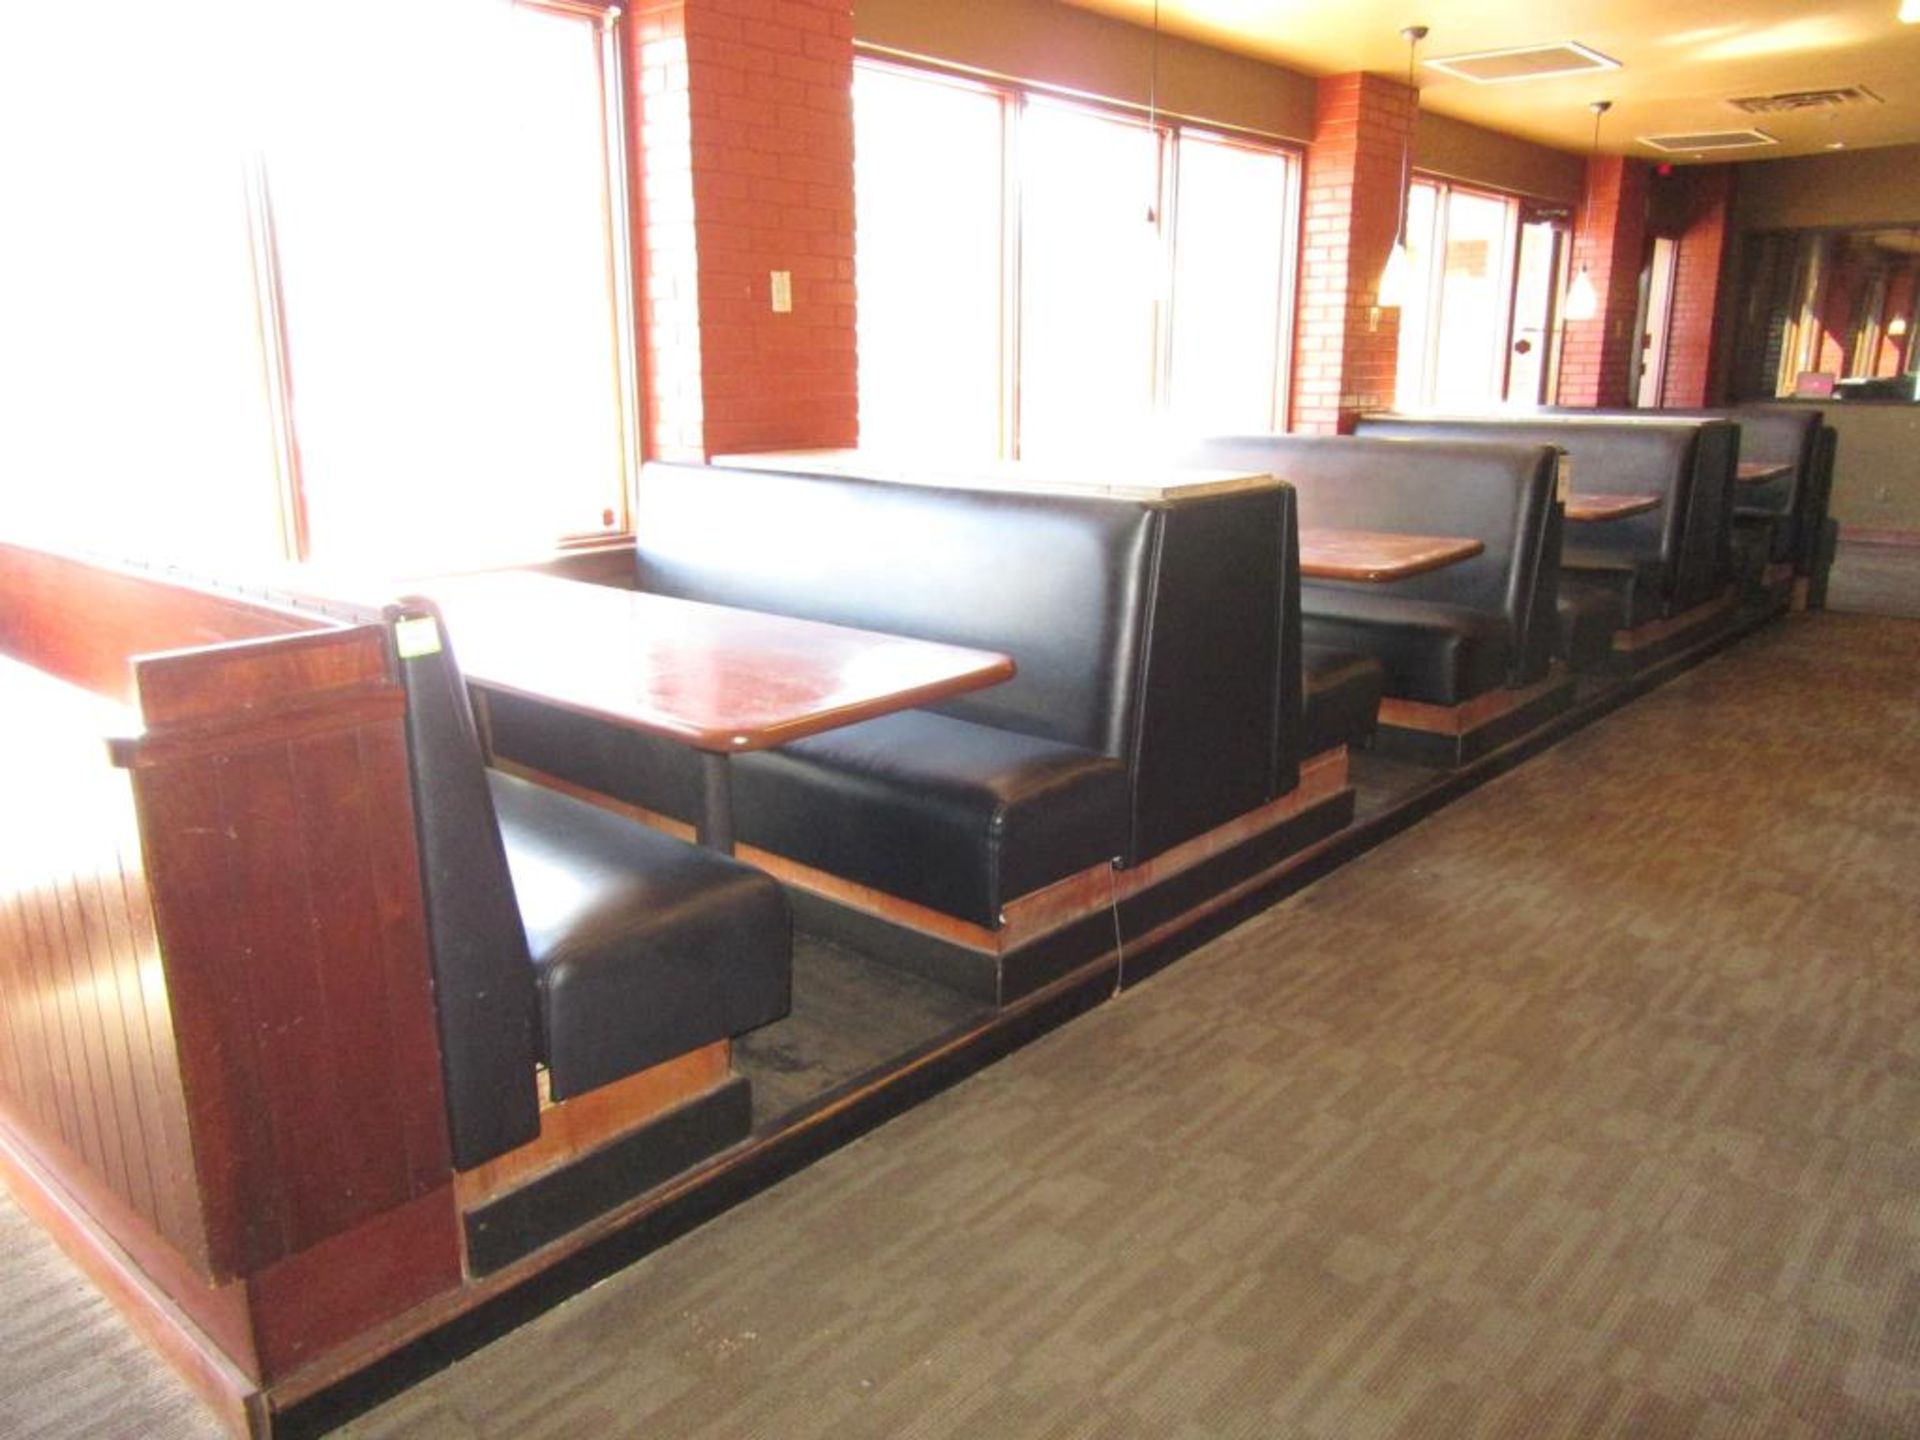 Booth Seating - Image 4 of 7